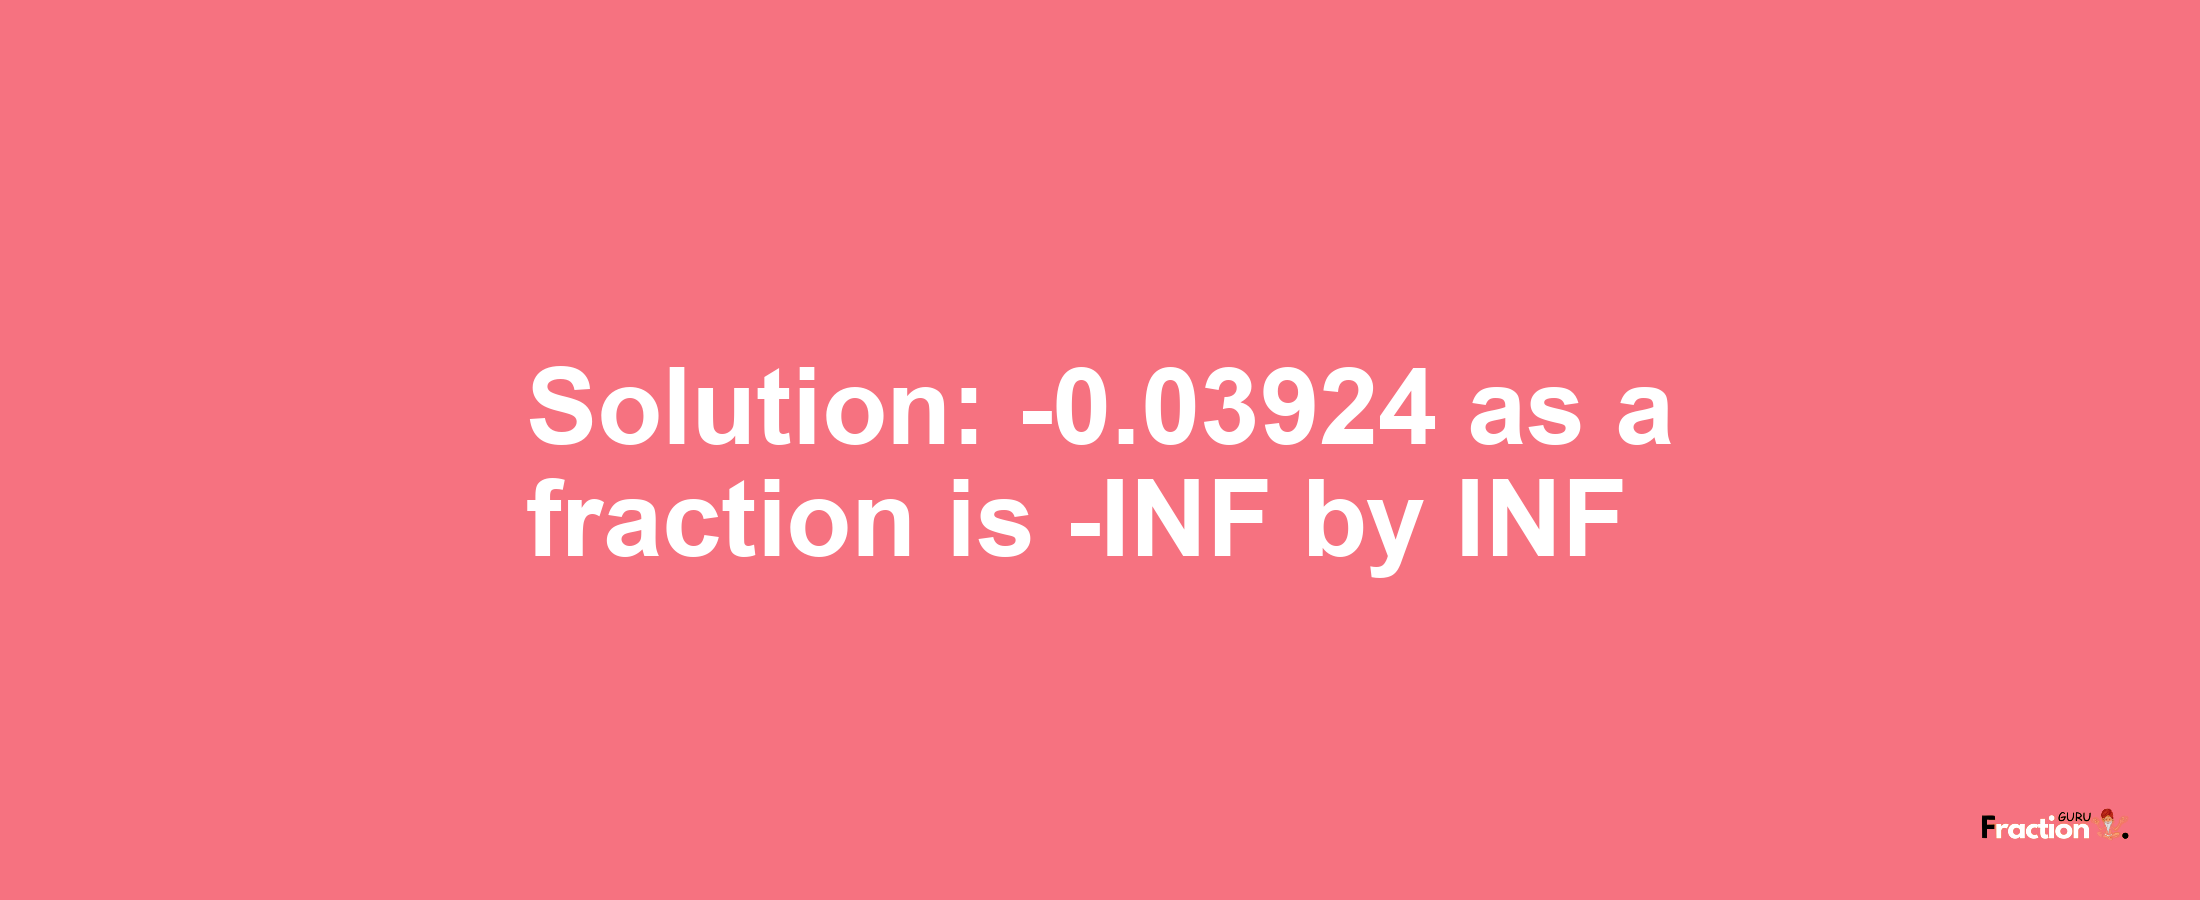 Solution:-0.03924 as a fraction is -INF/INF